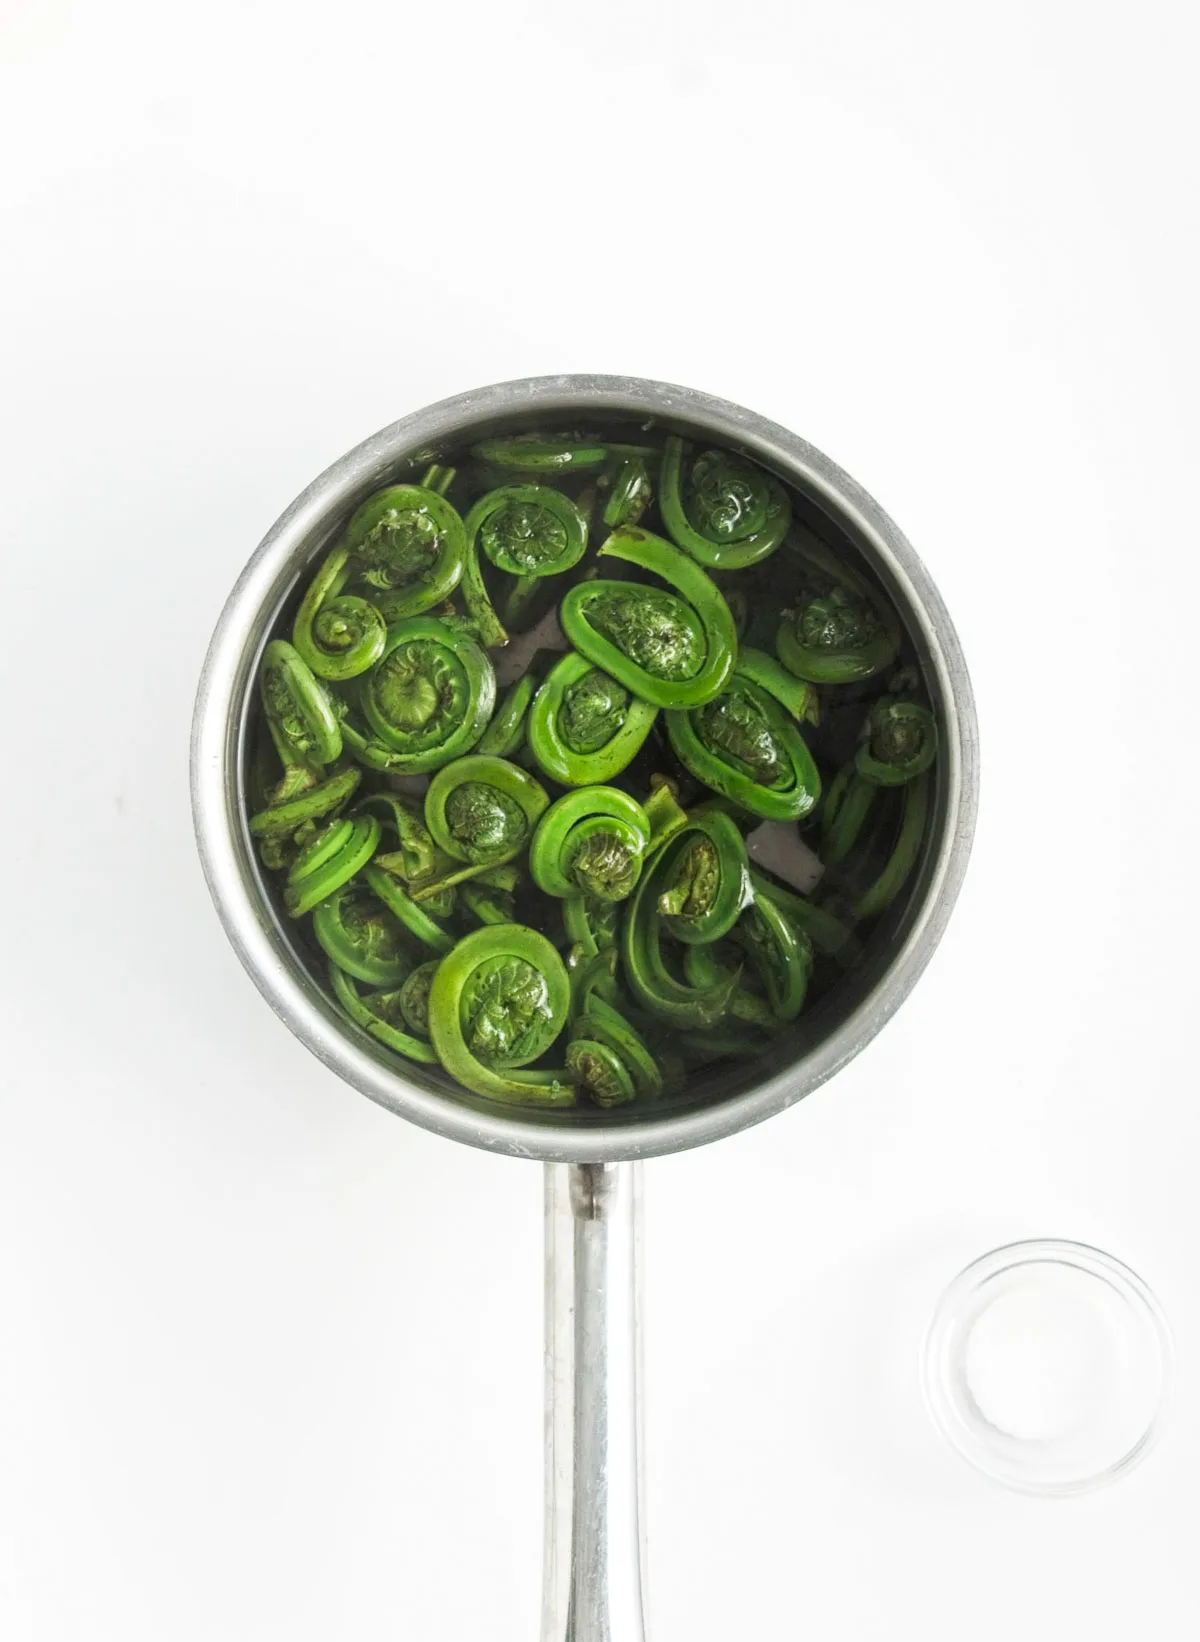 Fiddleheads blanching in a saucepan until they turn bright green